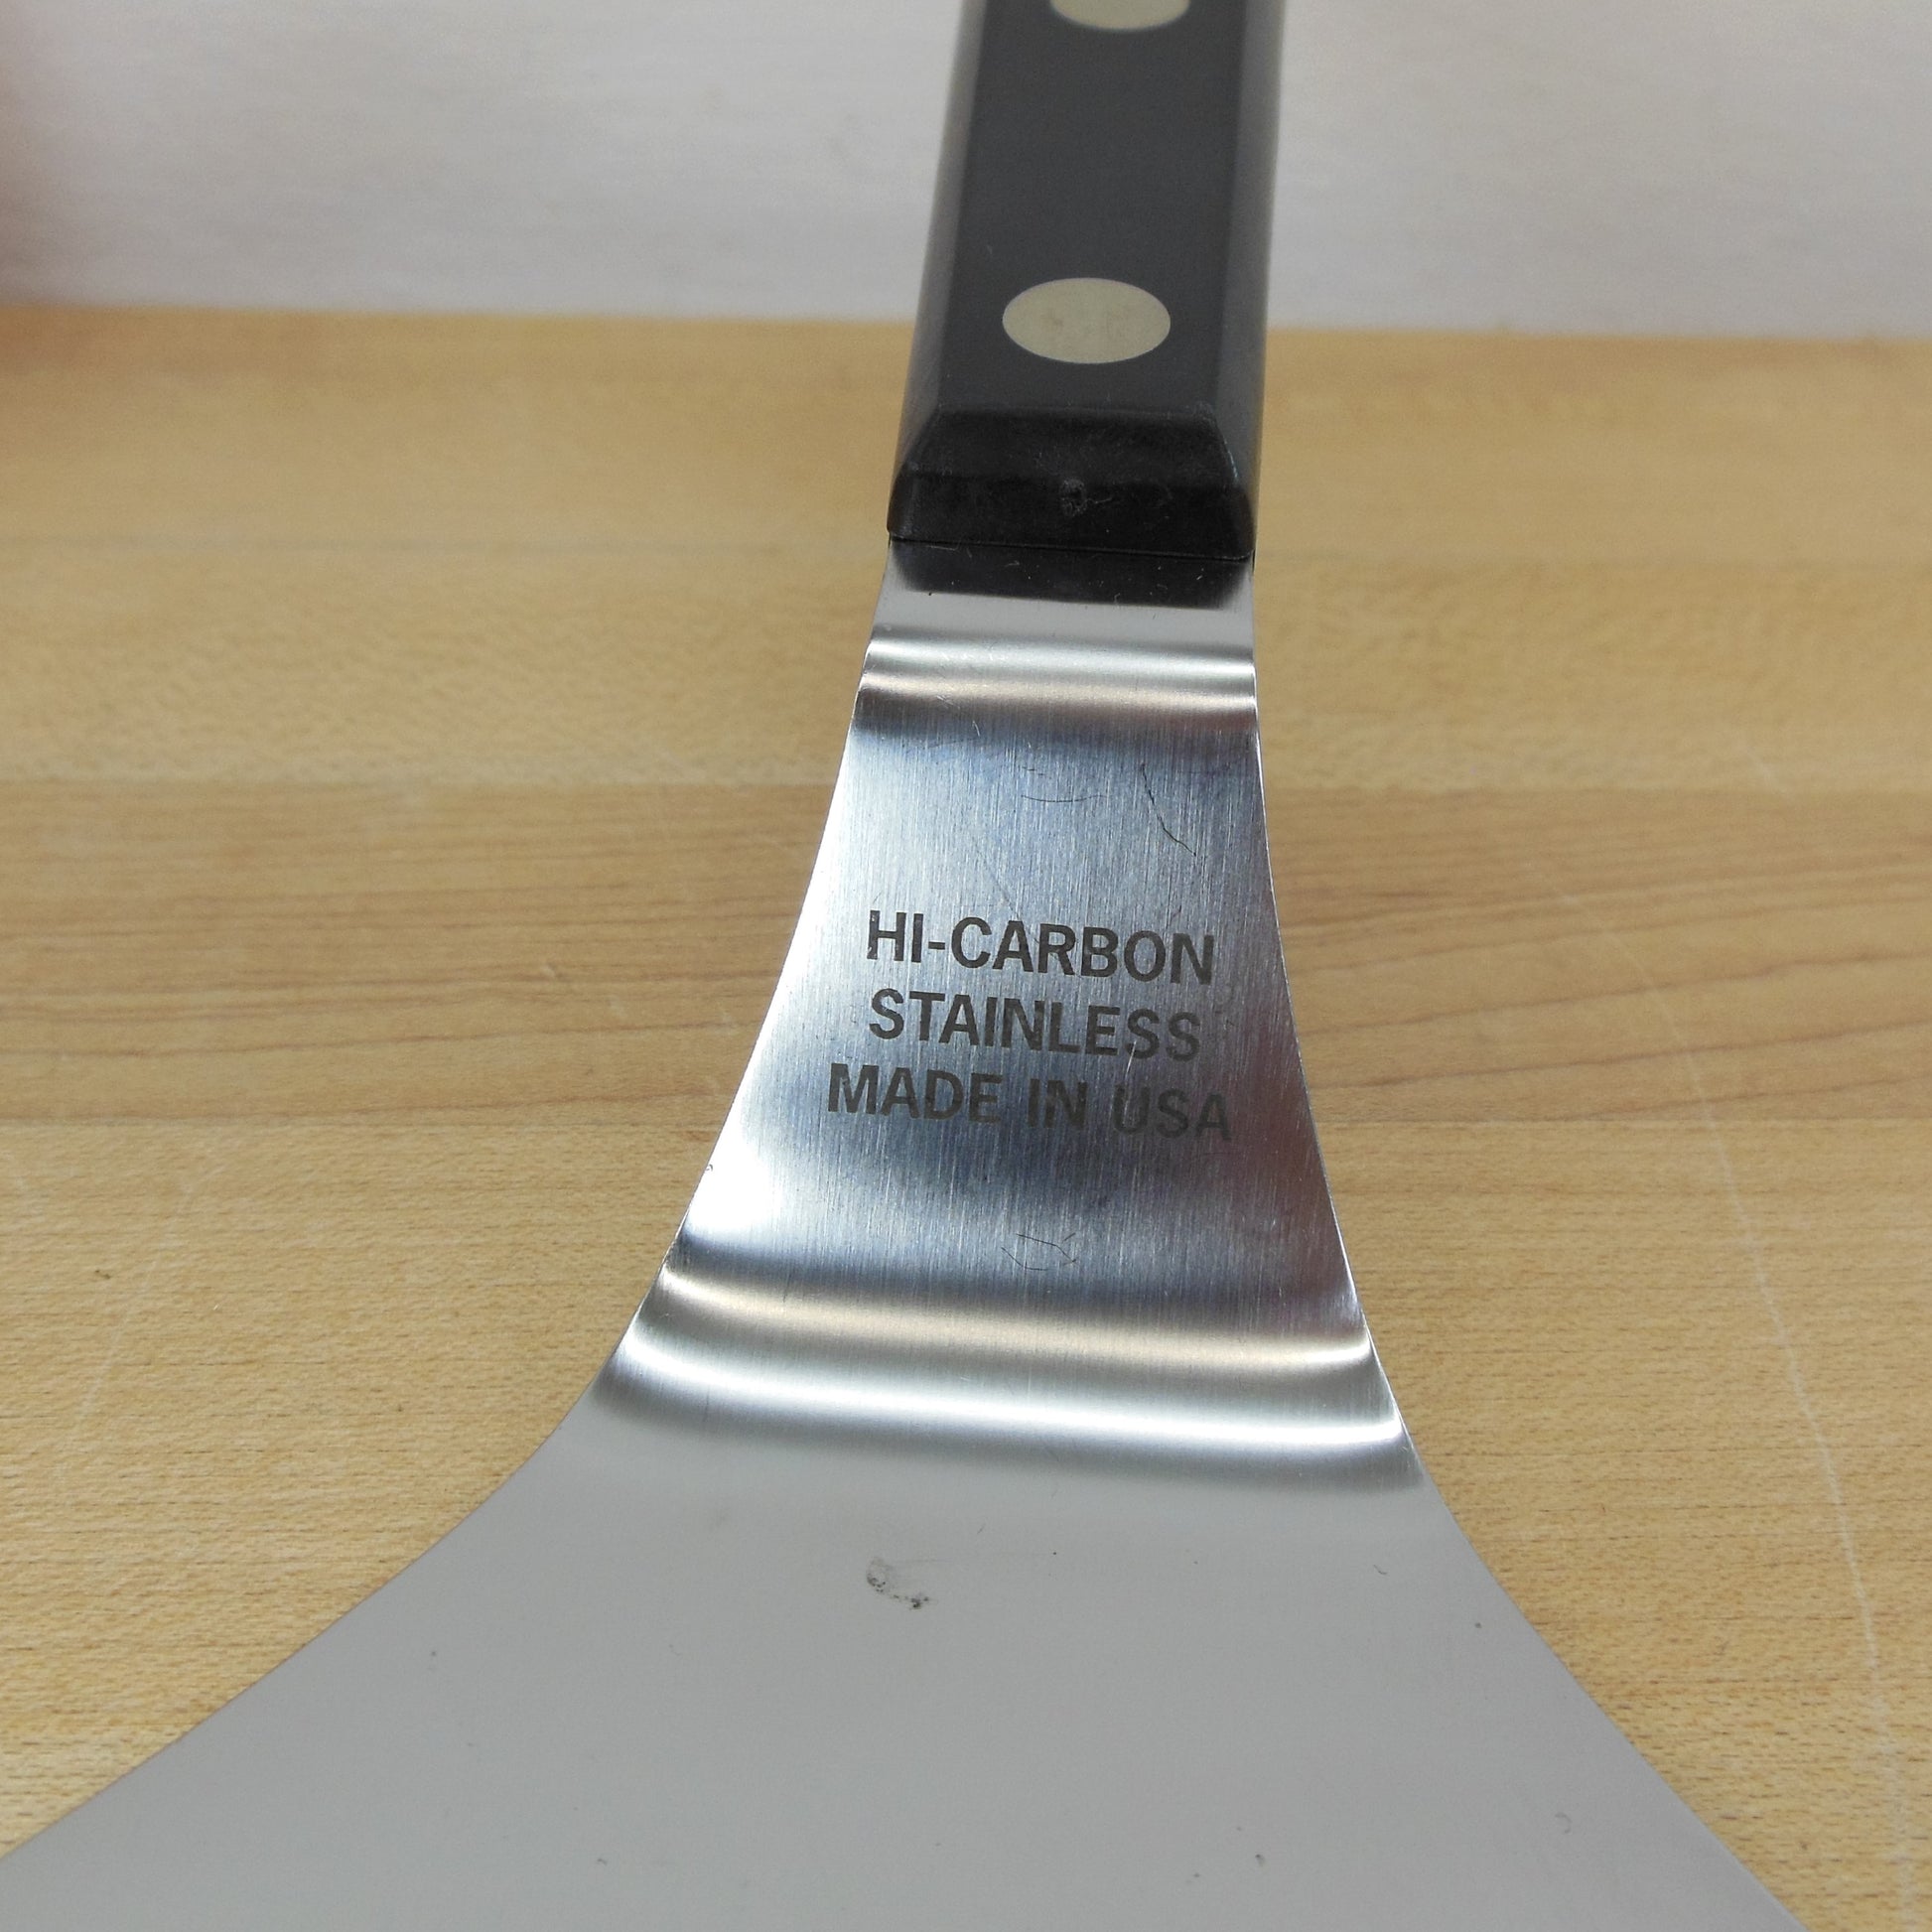 Cutco 17 KG Stainless Slotted Spatula Turner Classic Brown Handle